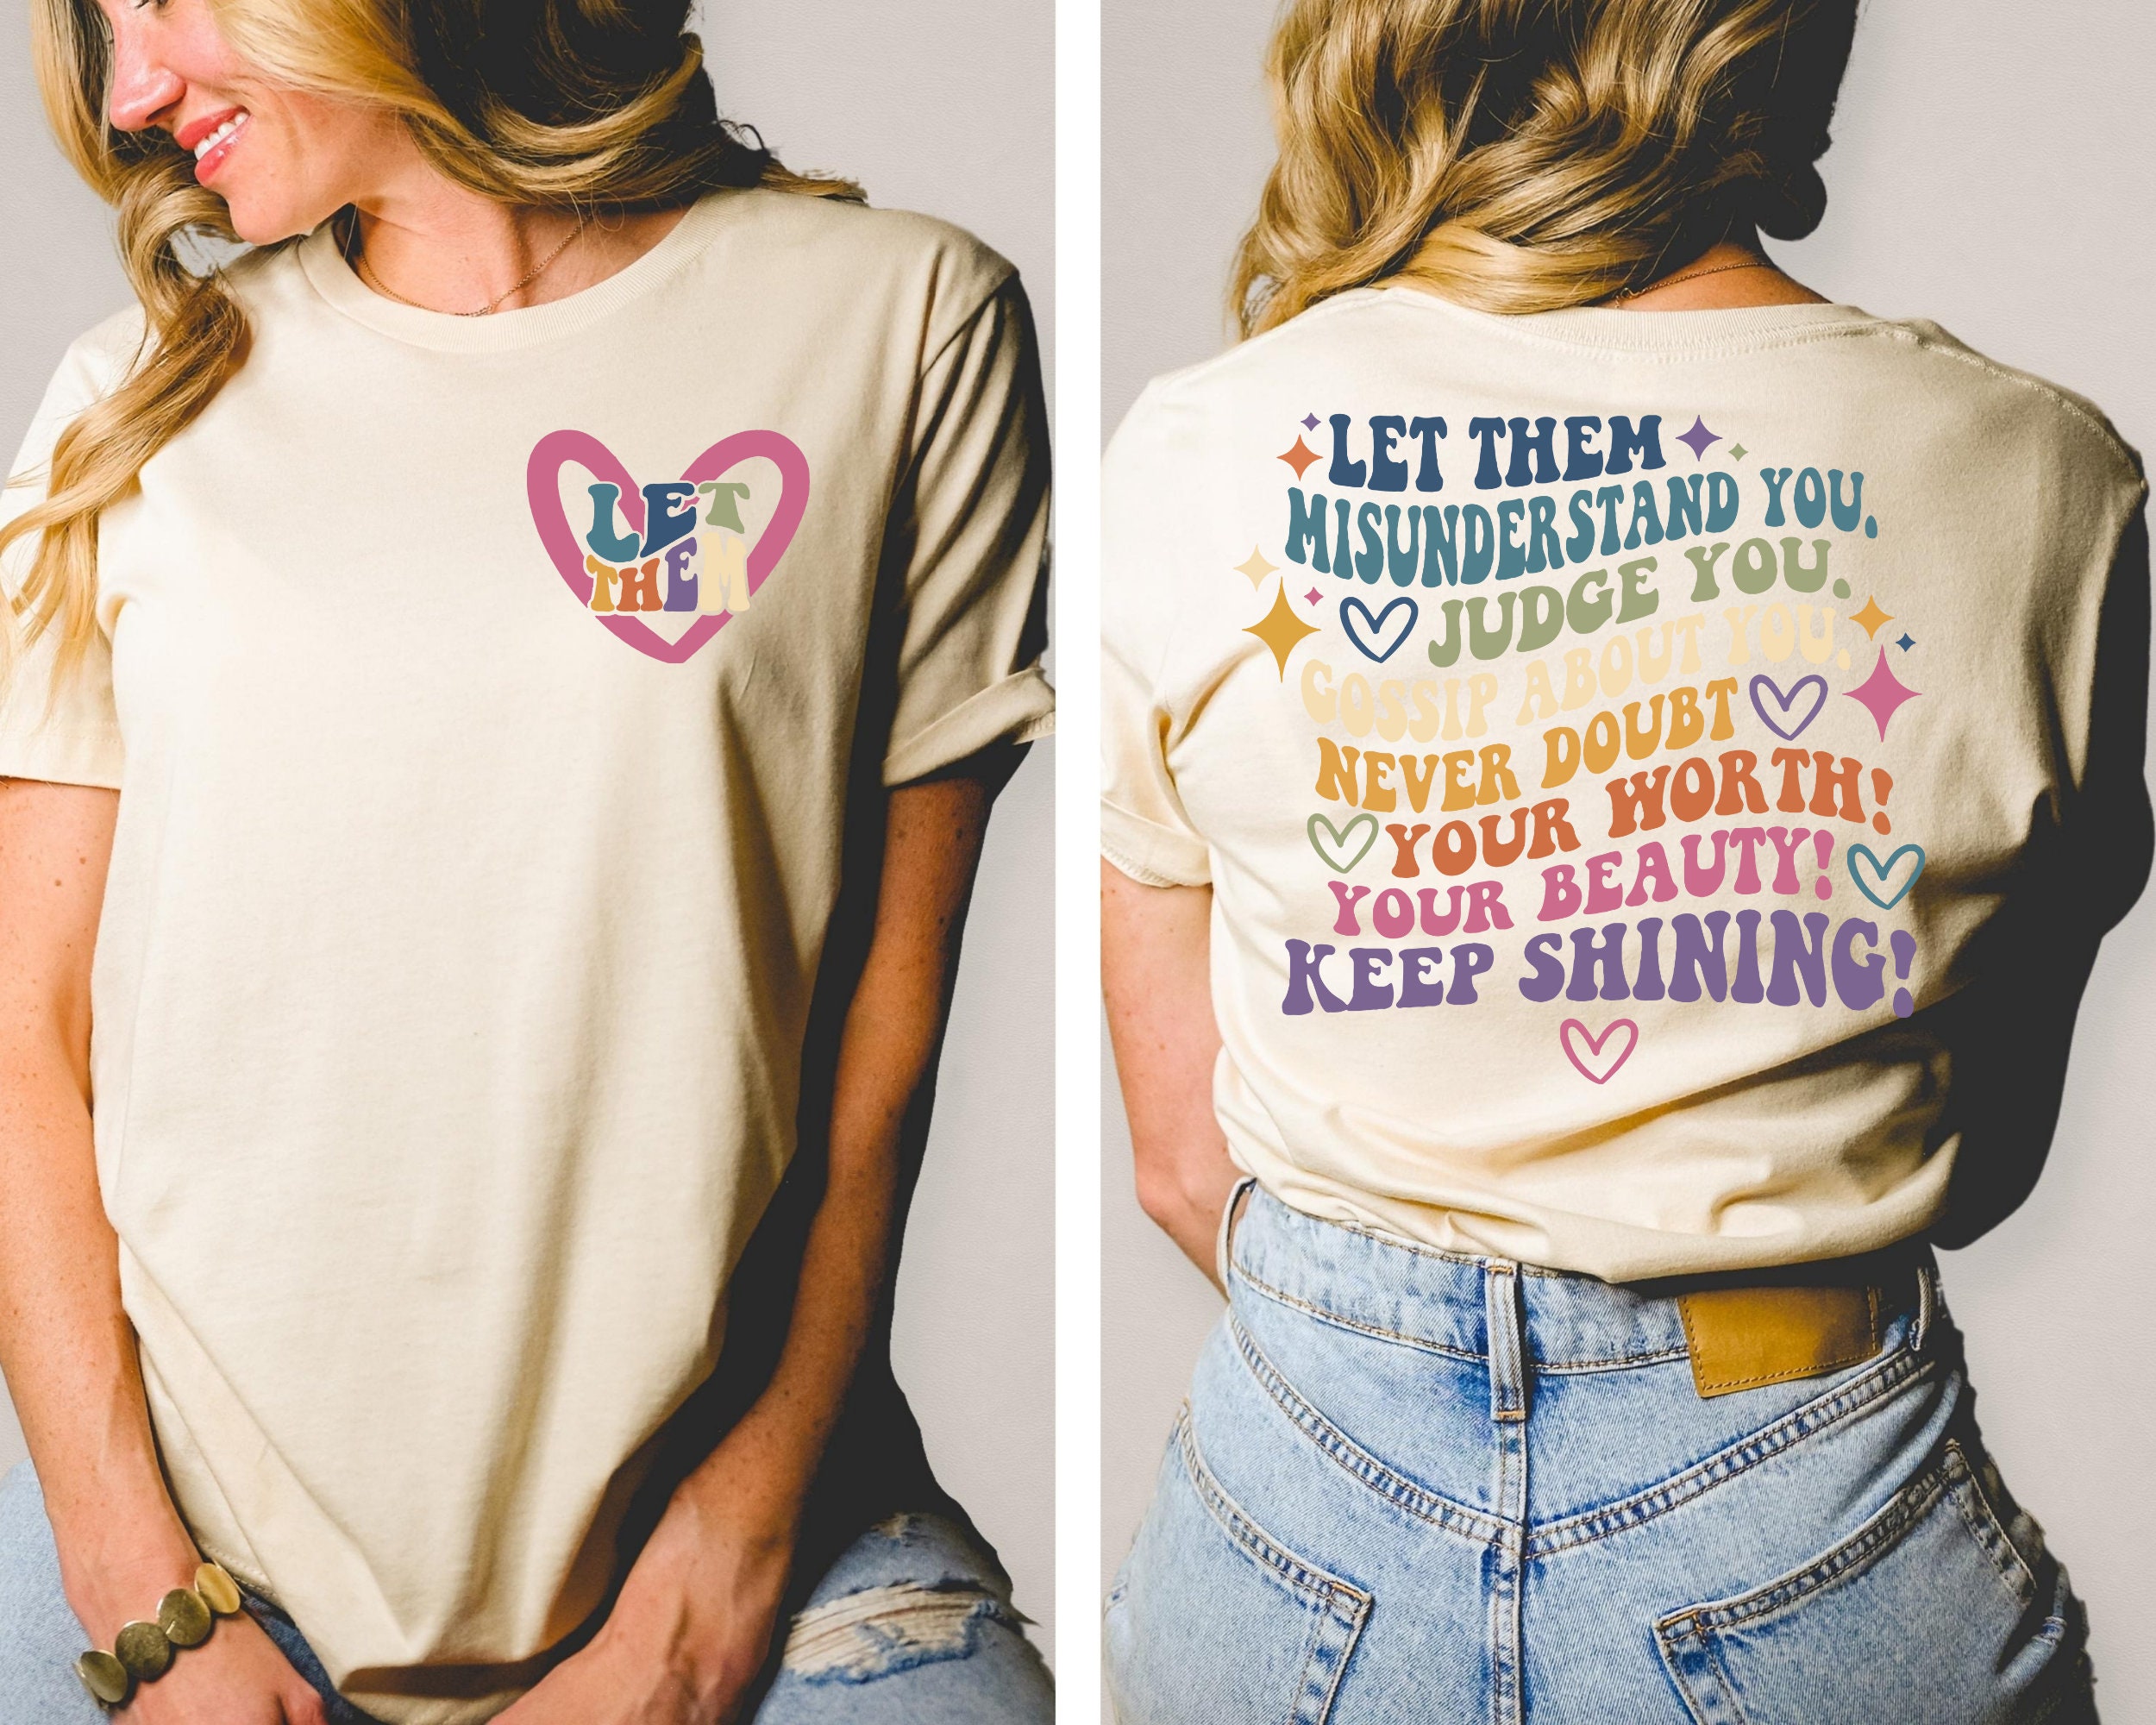 Discover Let Them Misunderstand You Front And Back Shirt, Judge You, Gossip About You Shirt, Trendy Shirt, Inspirational Quotes,Mental Health Matters